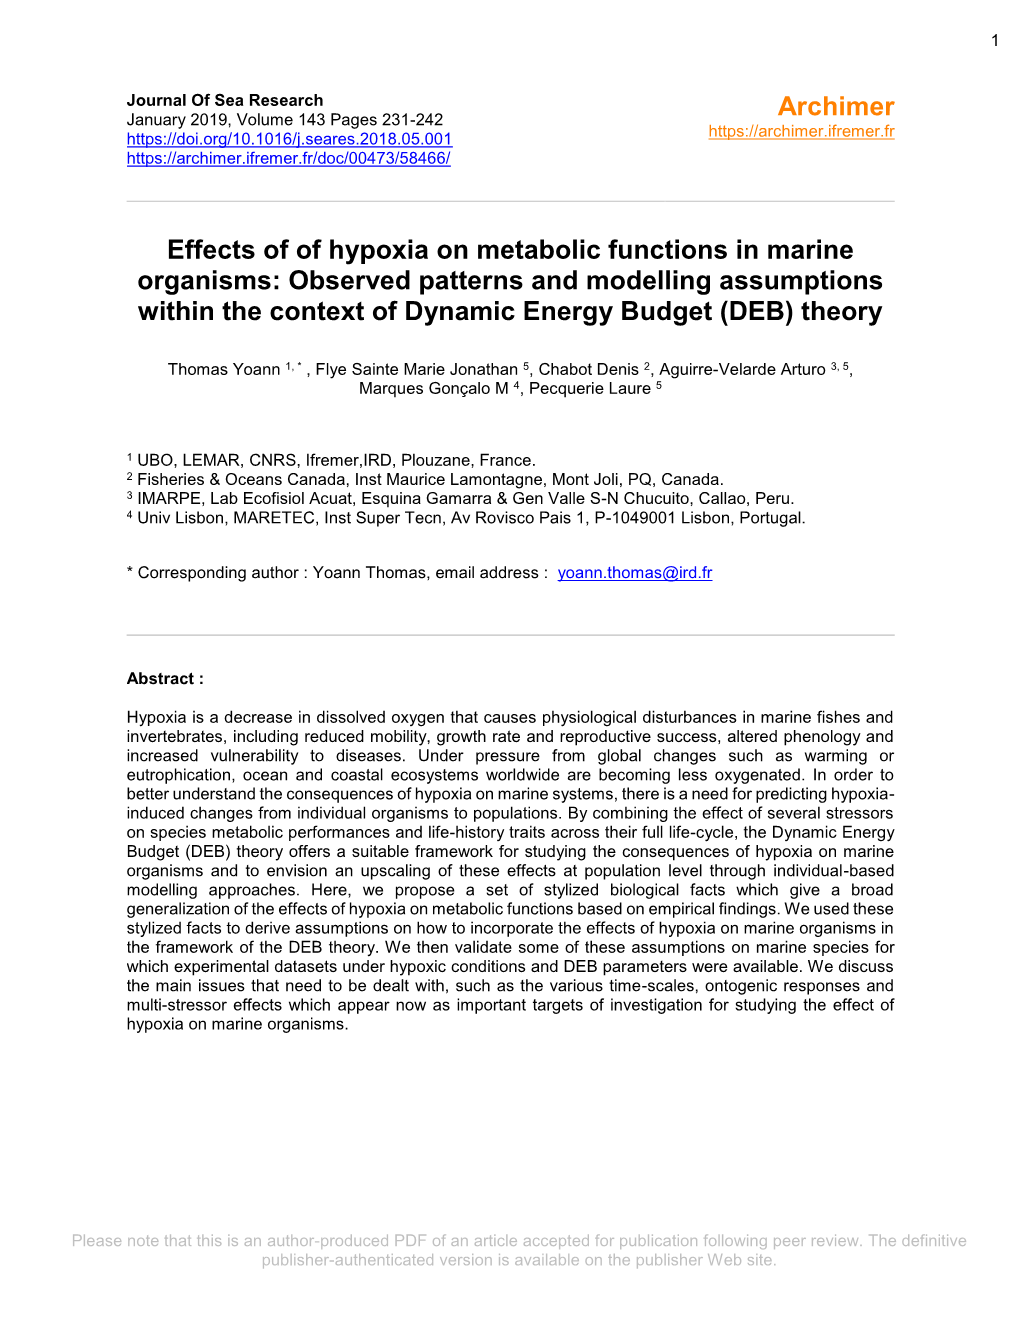 Effects of Hypoxia on Metabolic Functions in Marine Organisms: Observed Patterns and Modelling Assumptions Within the Context Of